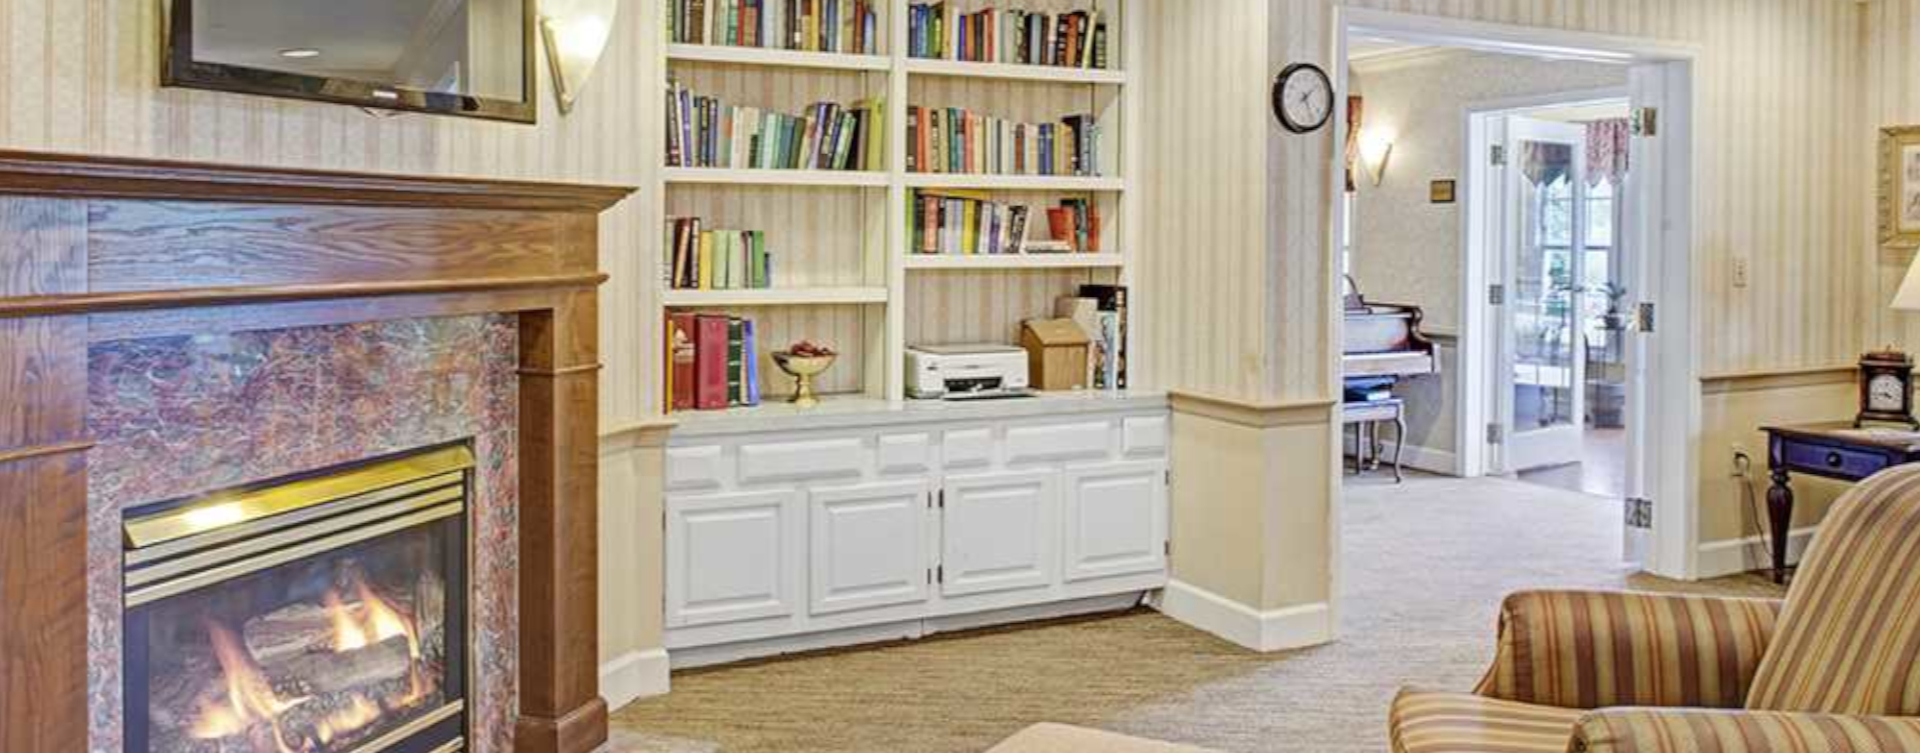 Enjoy a good book in the living room at Bickford of Scioto